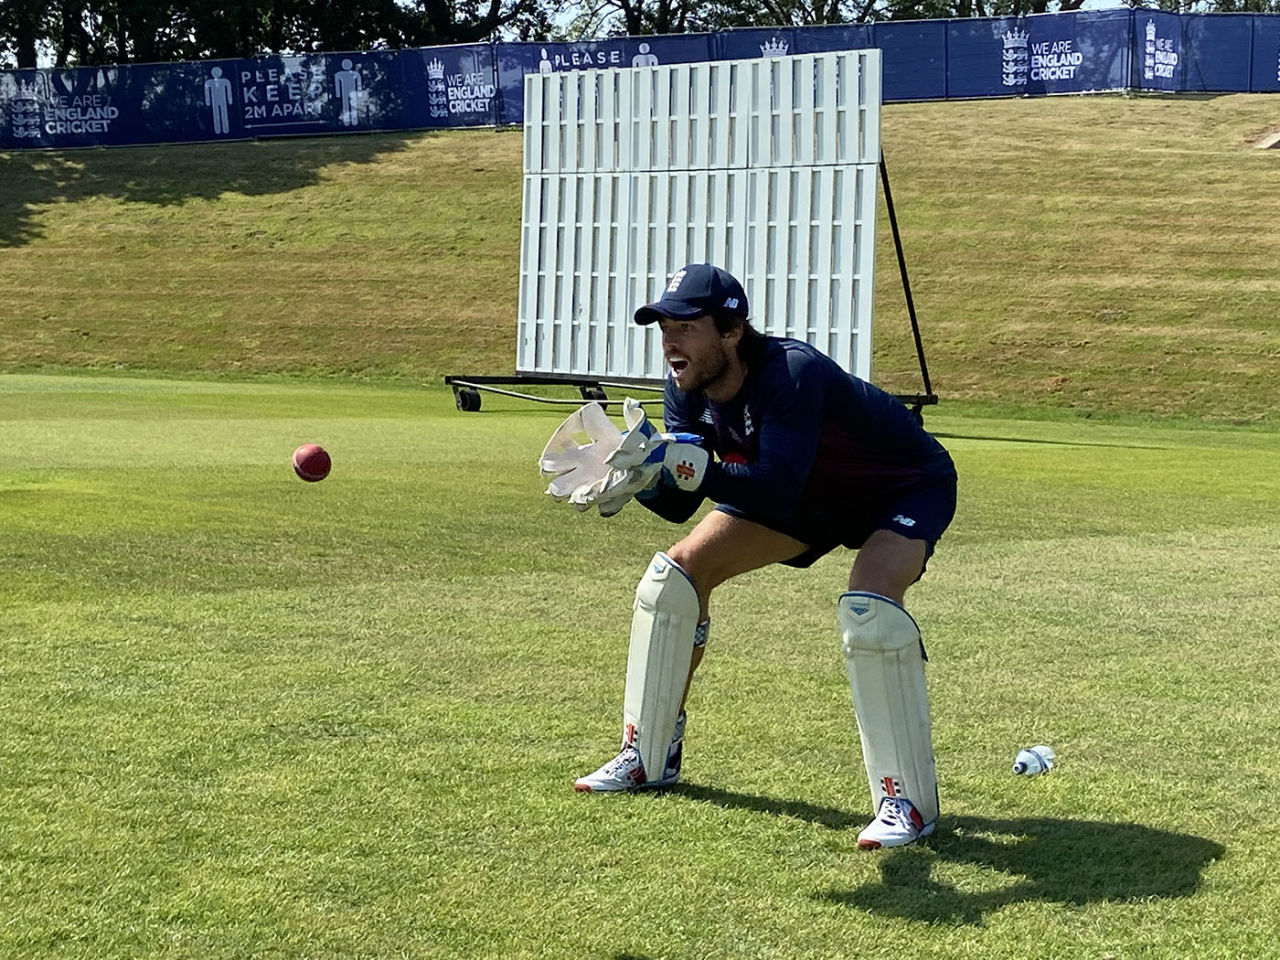 Ben Foakes keep his eye on the ball at England training, Ageas Bowl, June 26, 2020